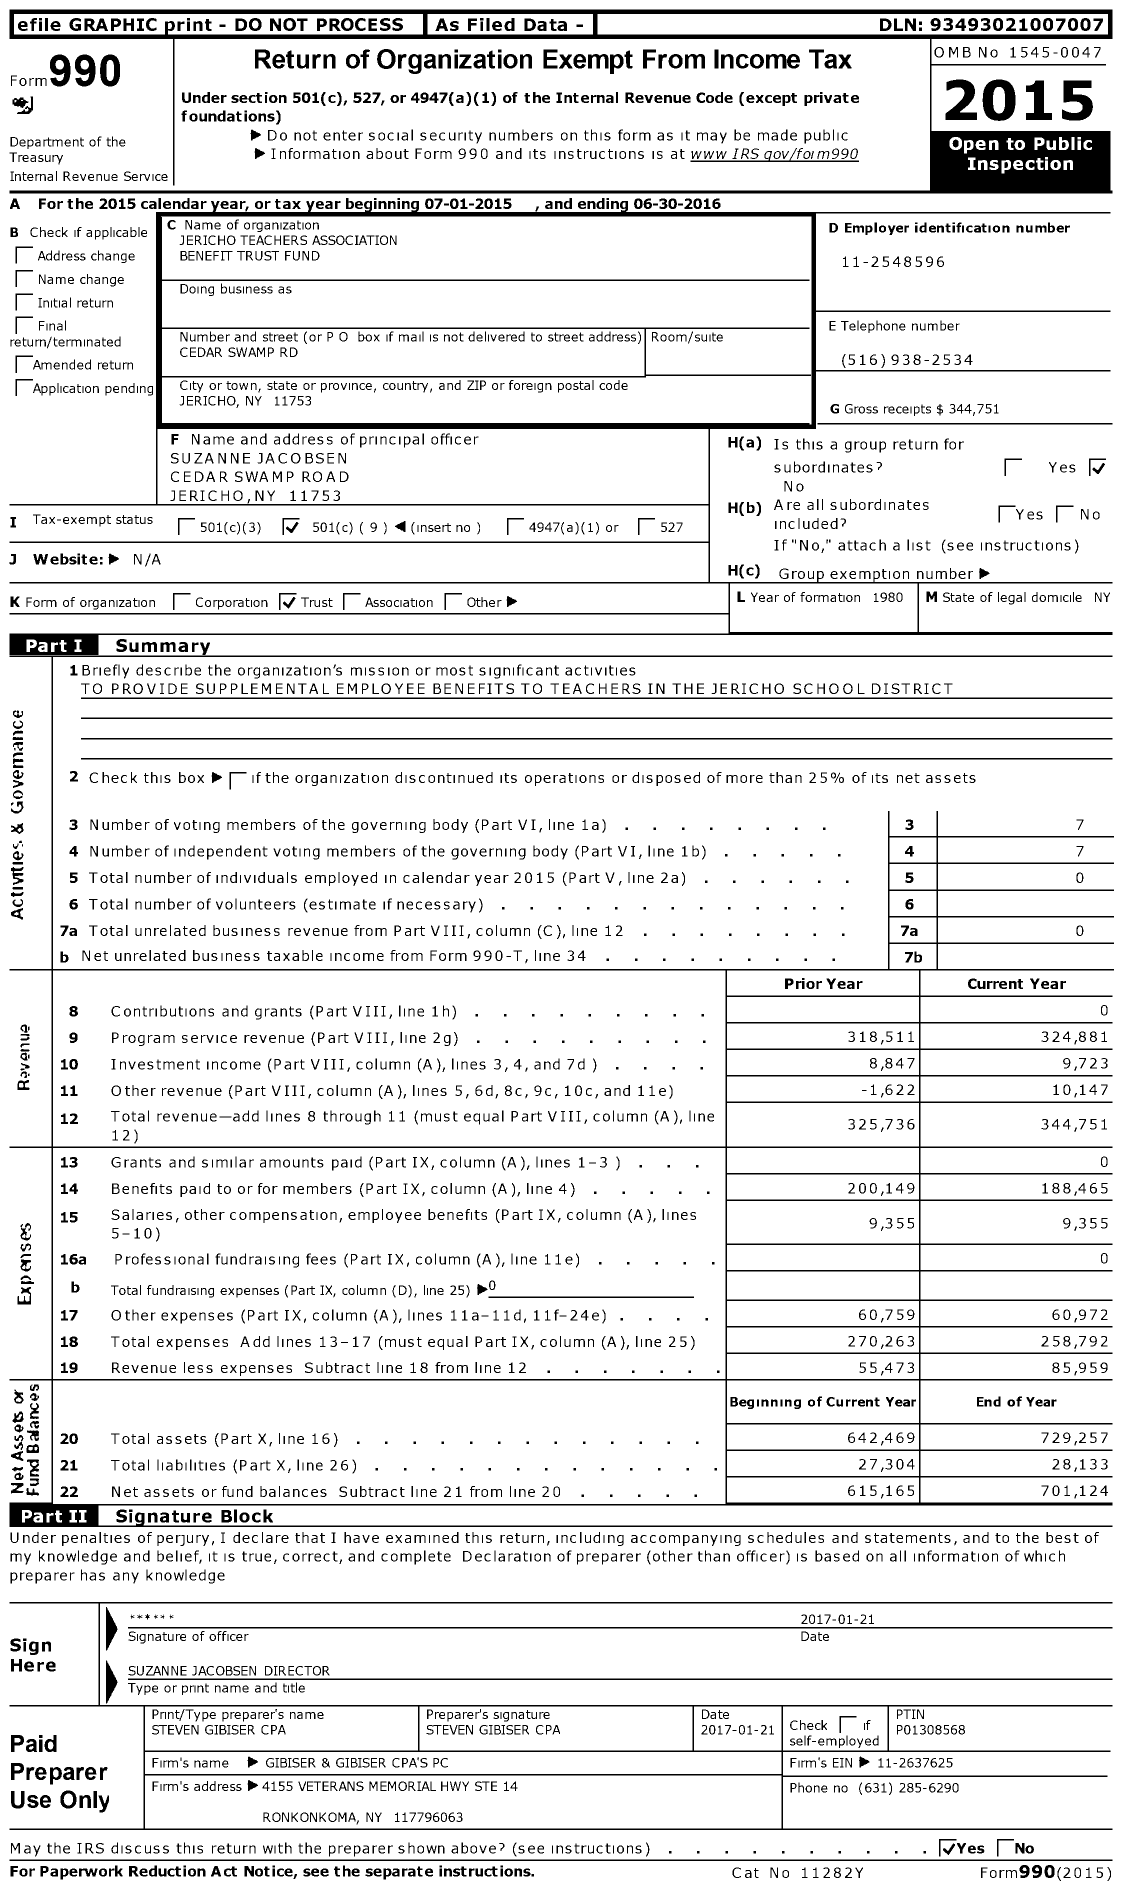 Image of first page of 2015 Form 990O for Jericho Teachers Association Benefit Trust Fund